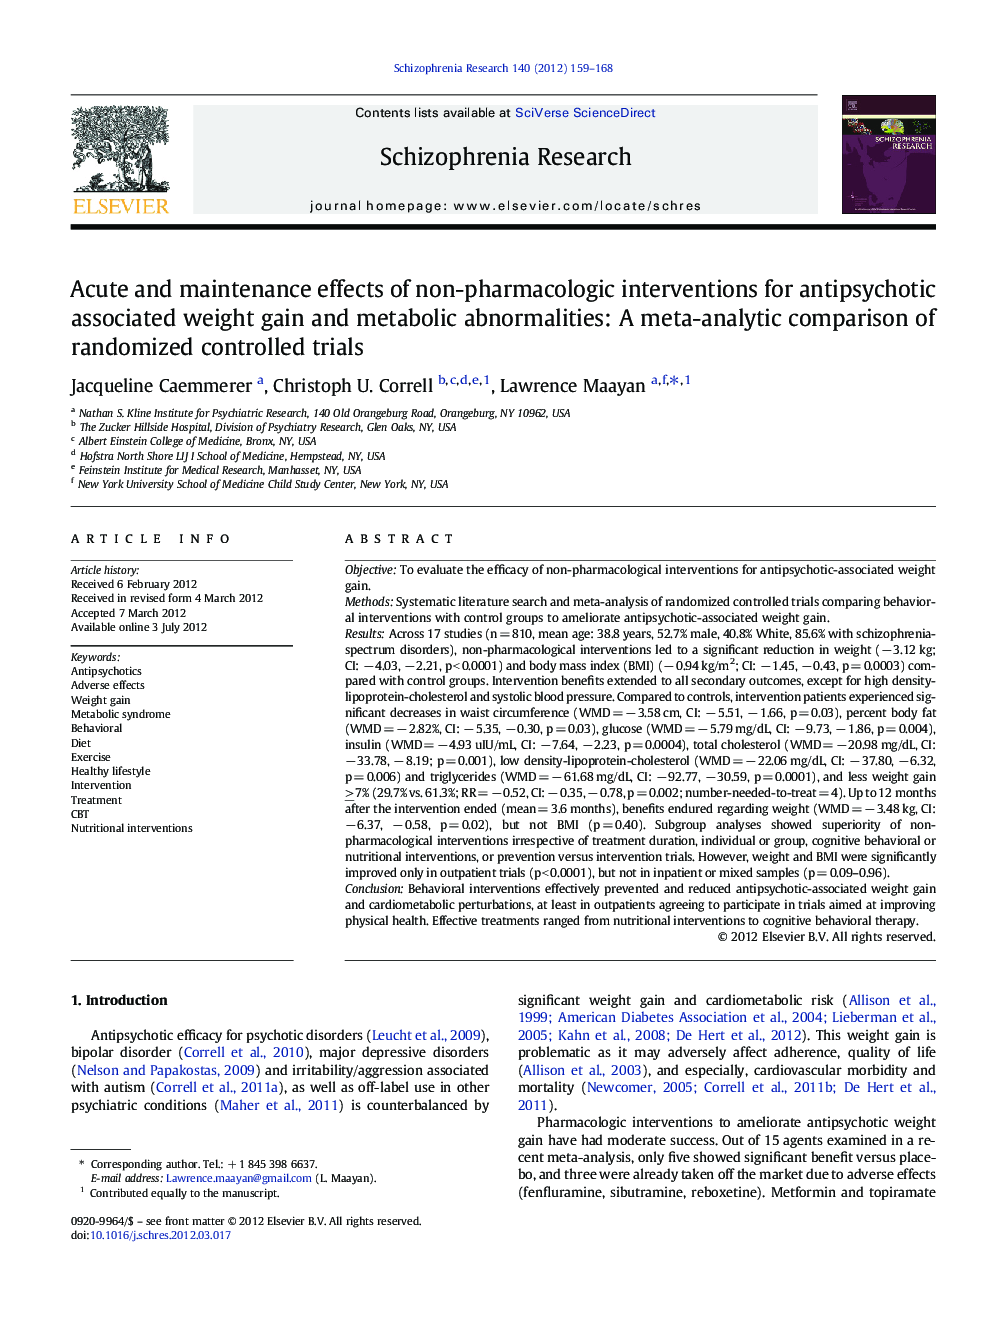 Acute and maintenance effects of non-pharmacologic interventions for antipsychotic associated weight gain and metabolic abnormalities: A meta-analytic comparison of randomized controlled trials